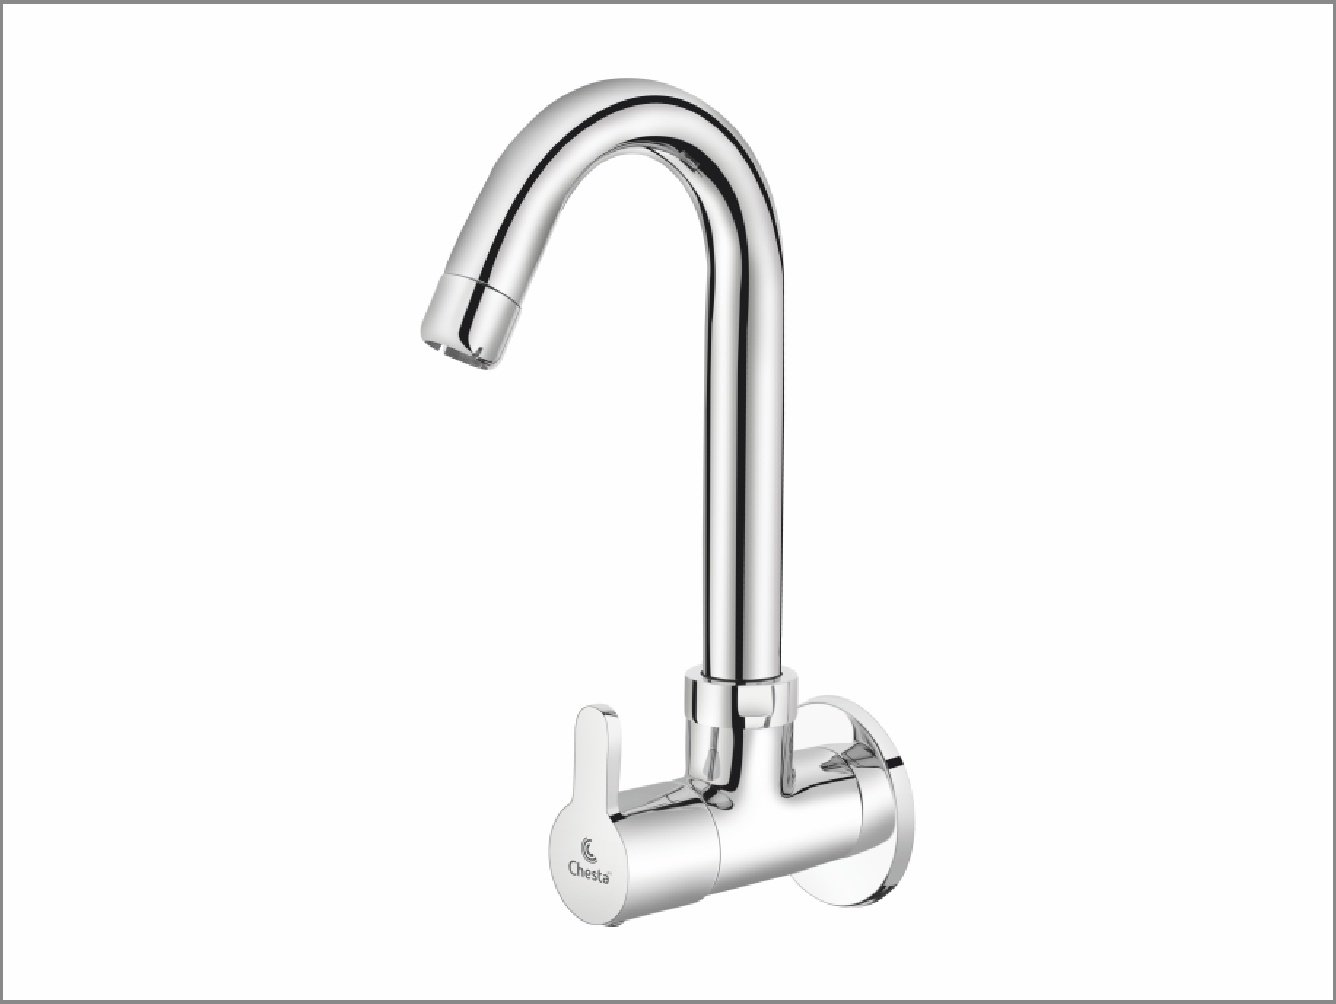 AK - 1006 - Sink Cock with Wall Flange at Chesta Bath Fittings